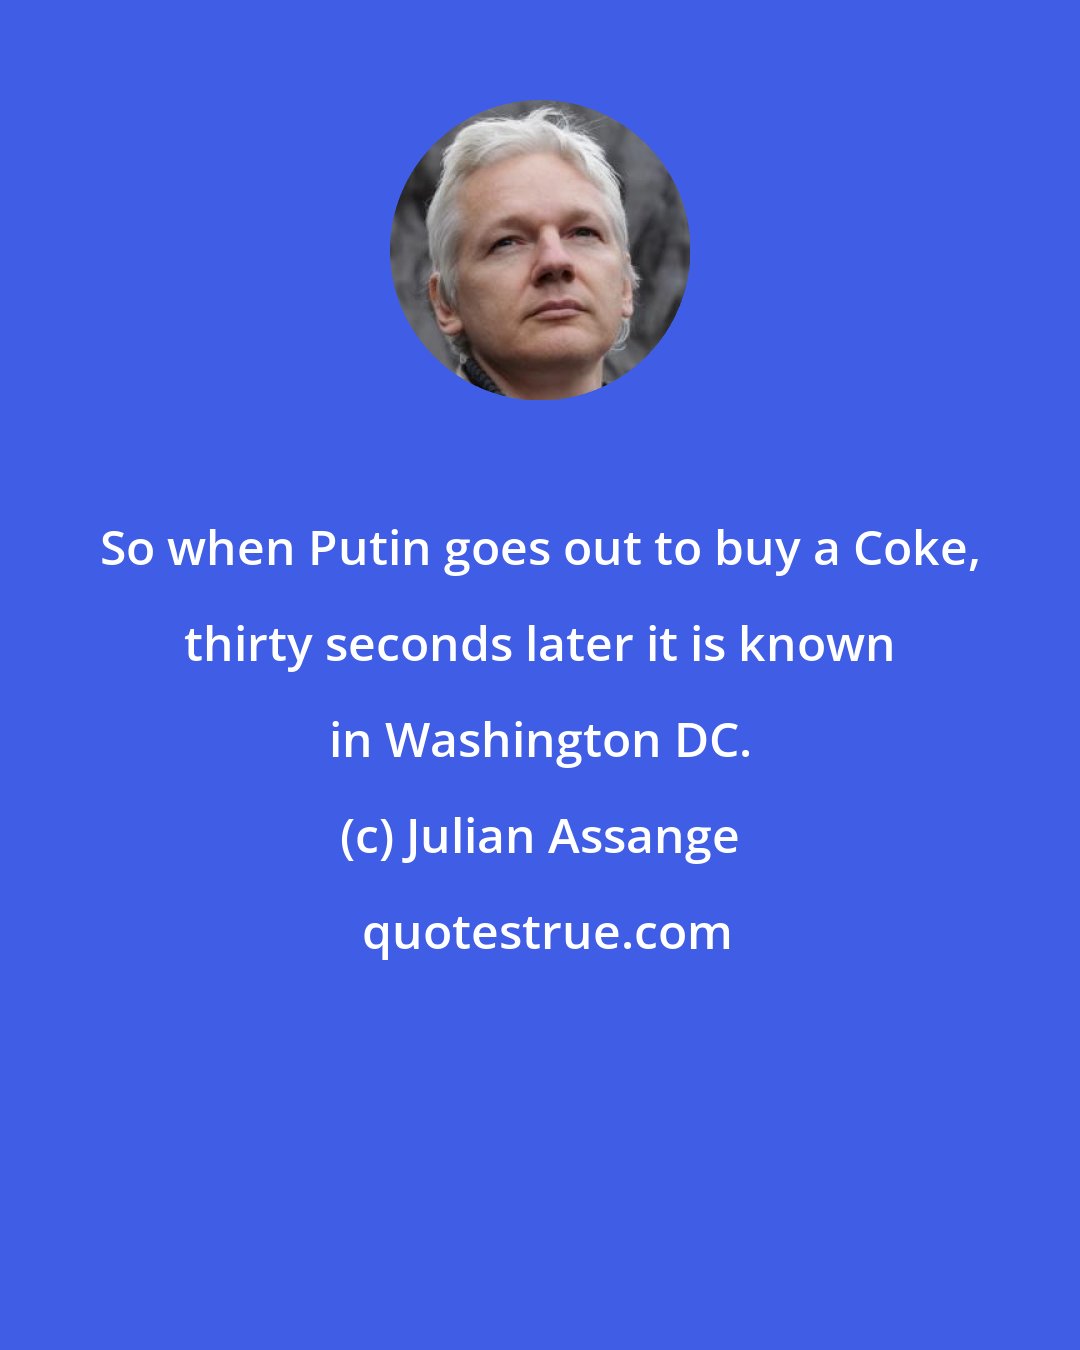 Julian Assange: So when Putin goes out to buy a Coke, thirty seconds later it is known in Washington DC.